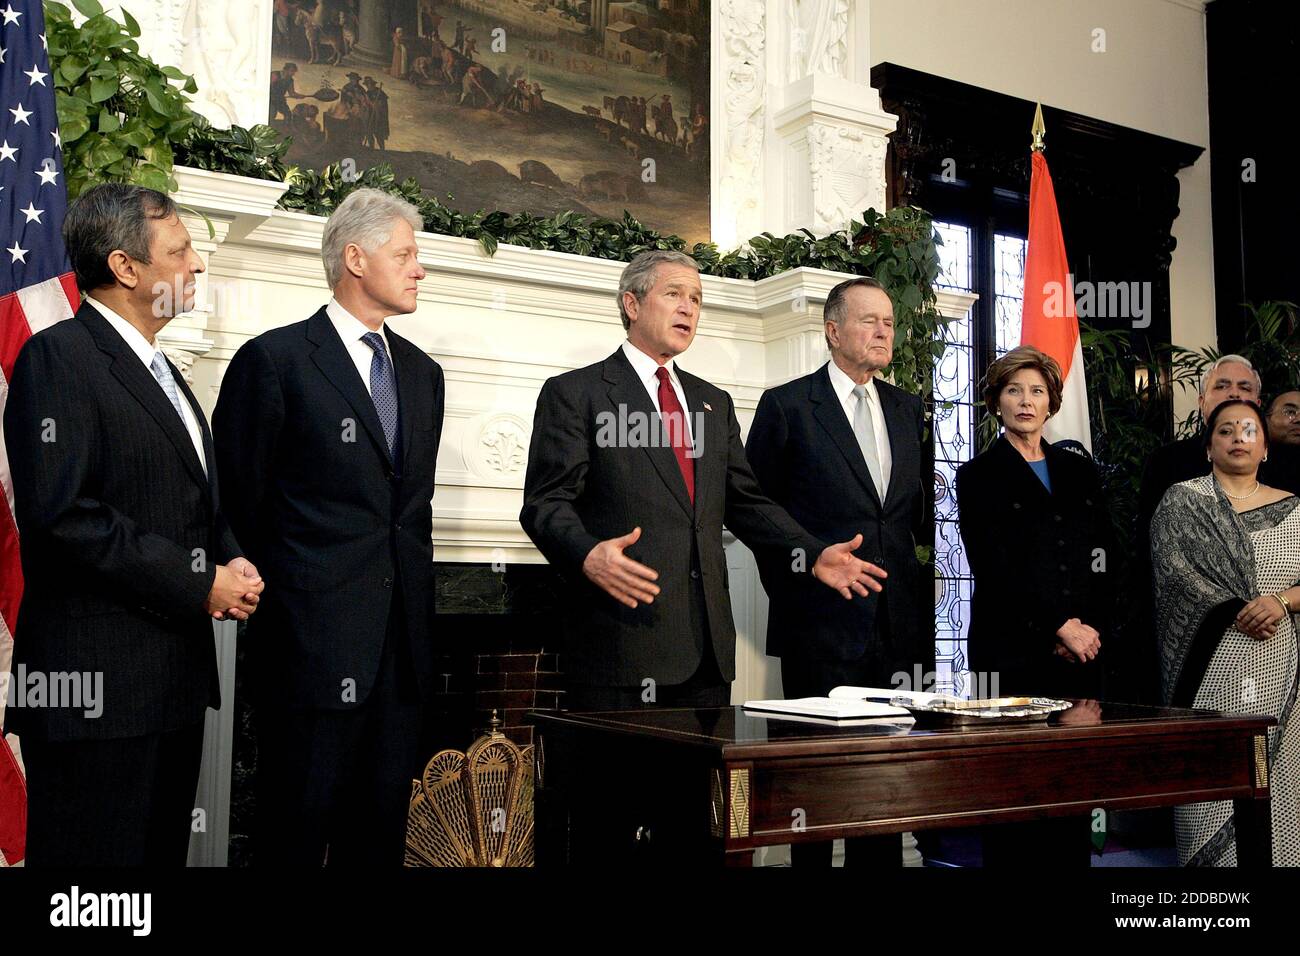 NO FILM, NO VIDEO, NO TV, NO DOCUMENTARY - U.S. President George W. Bush , first lady Laura Bush (2nd r) and former Presidents Bill Clinton (l) and George H. W. Bush (r) visit the Indian embassy in Washington, January 3, 2005. Bush brought together former presidents George Bush and Clinton on Monday to launch an appeal for Americans to make a donation to help victims of the South Asia quake and tsunamis. The president's father and Clinton will lead a bipartisan effort to seek out donations both large and small to provide relief assistance to millions left homeless by the Dec. 26 calamity that Stock Photo